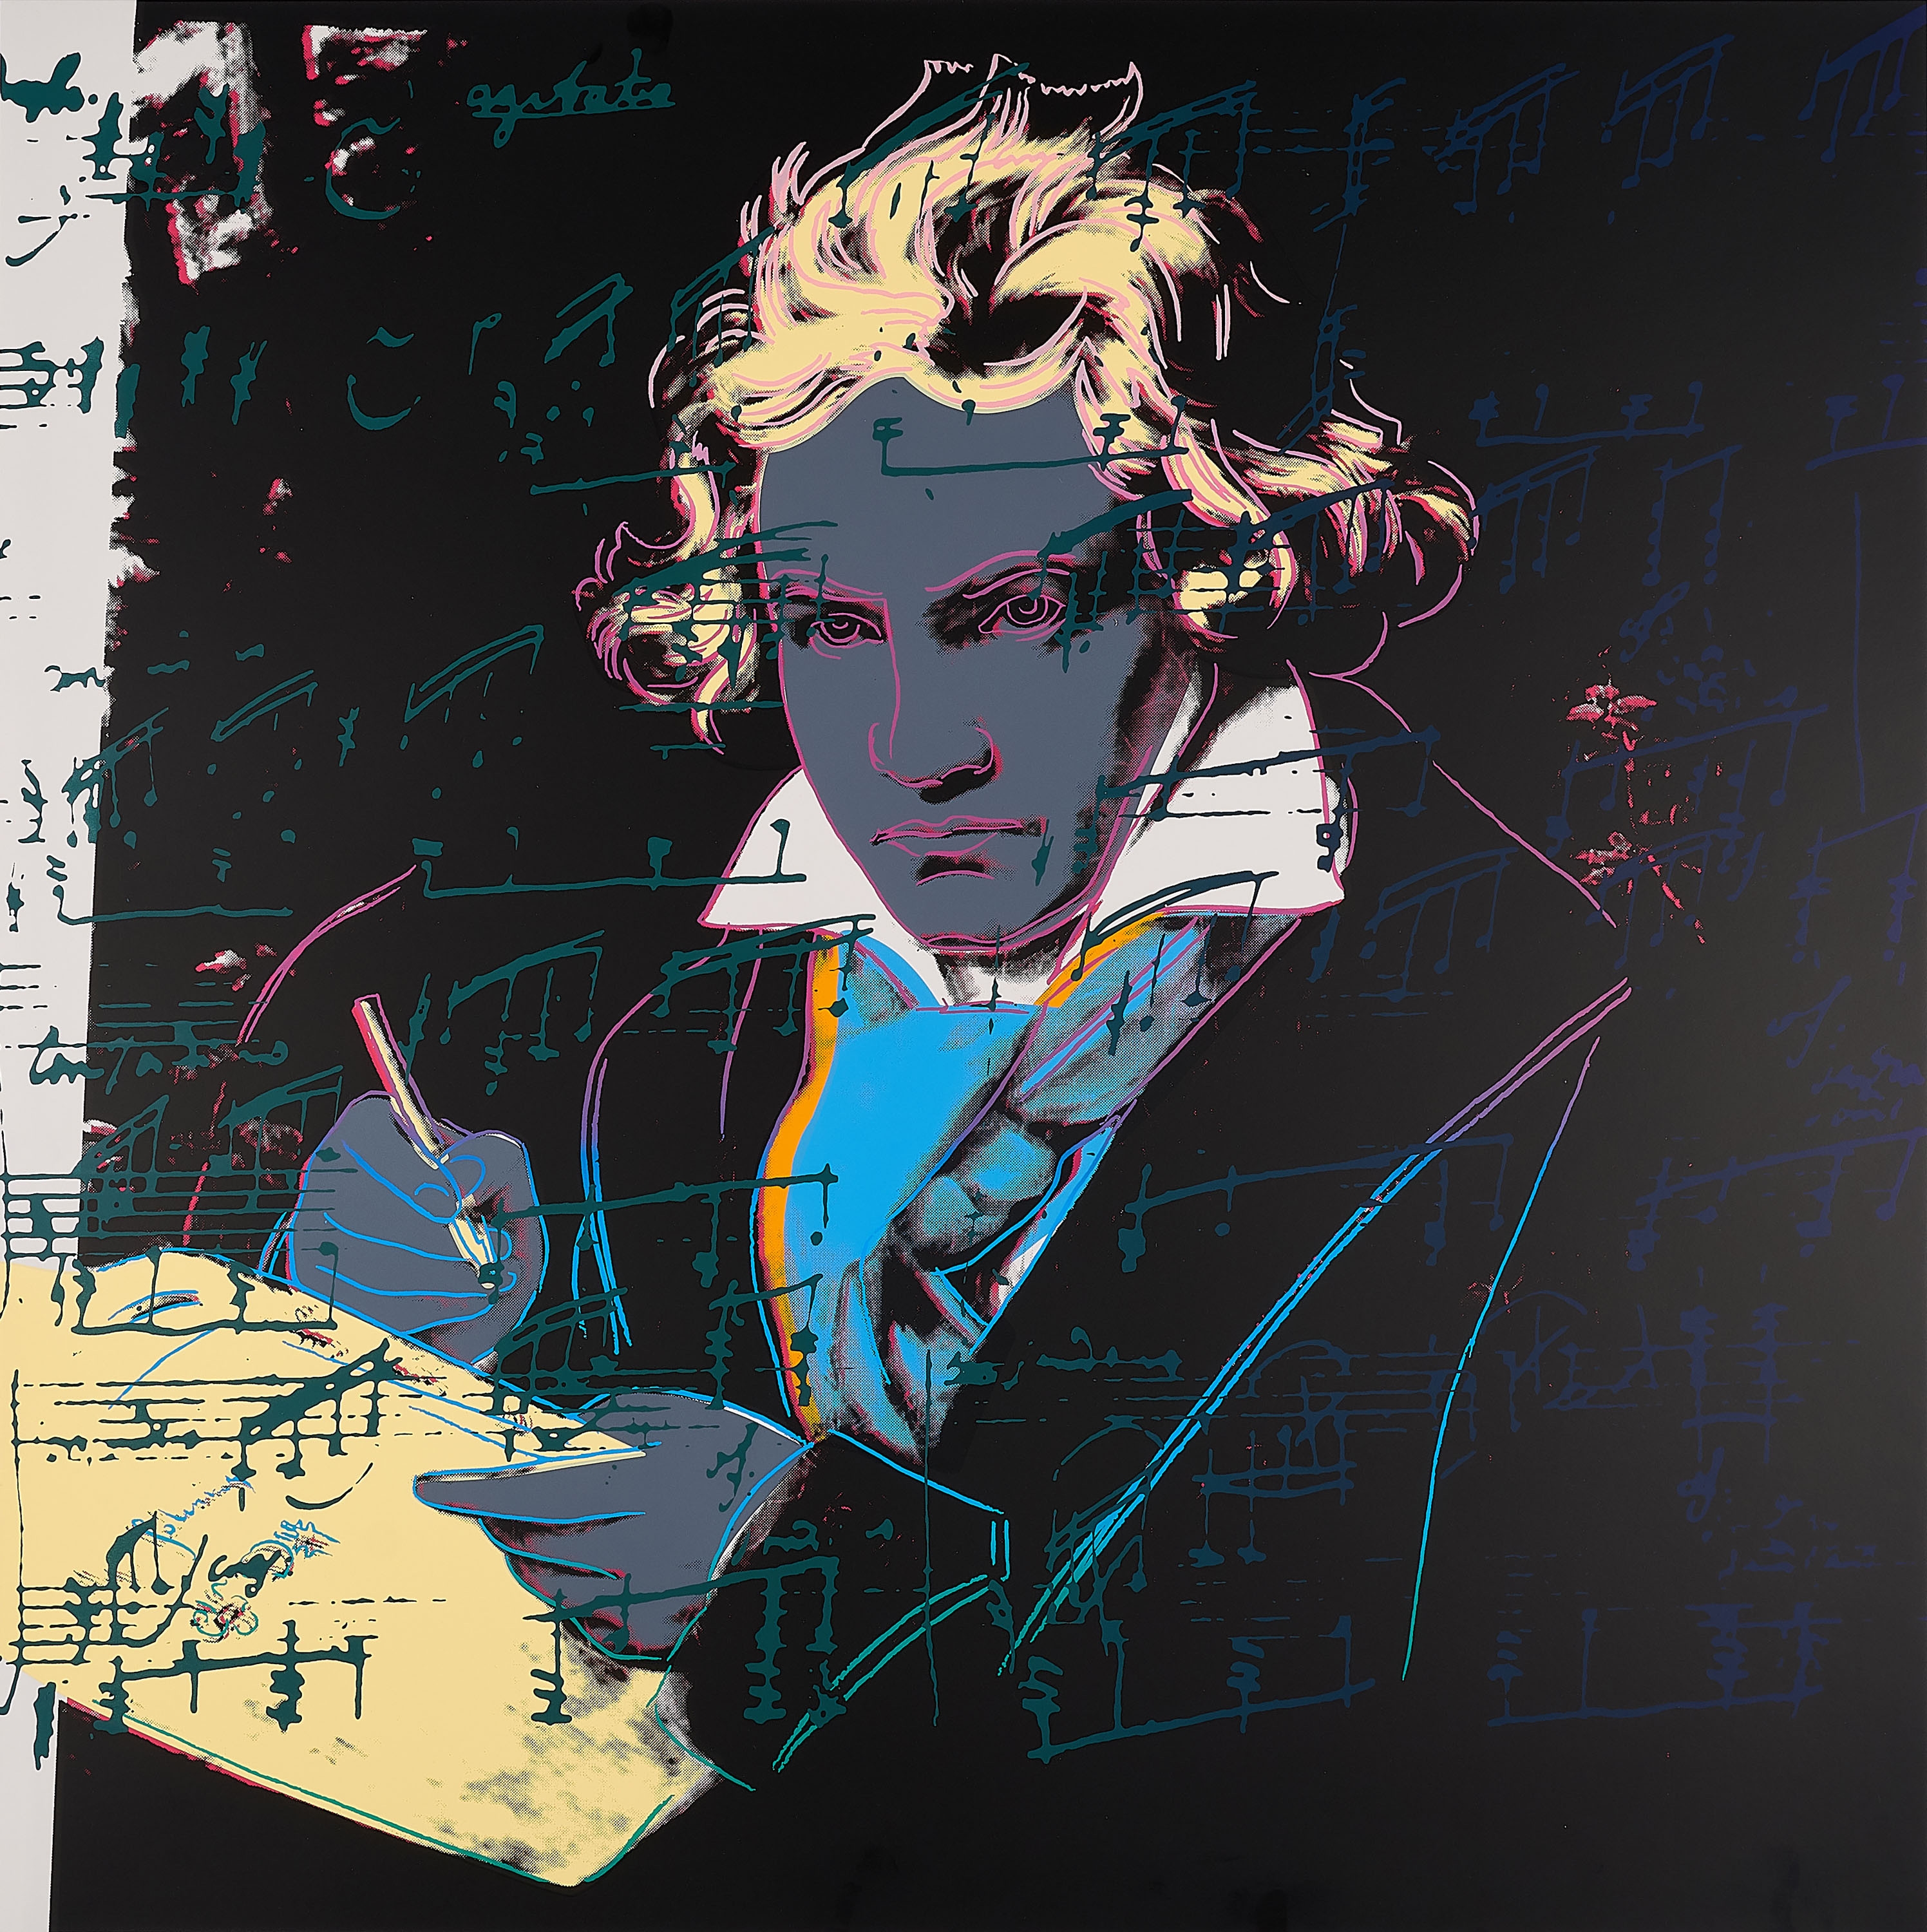 Beethoven 11.393. by Andy Warhol, 2020